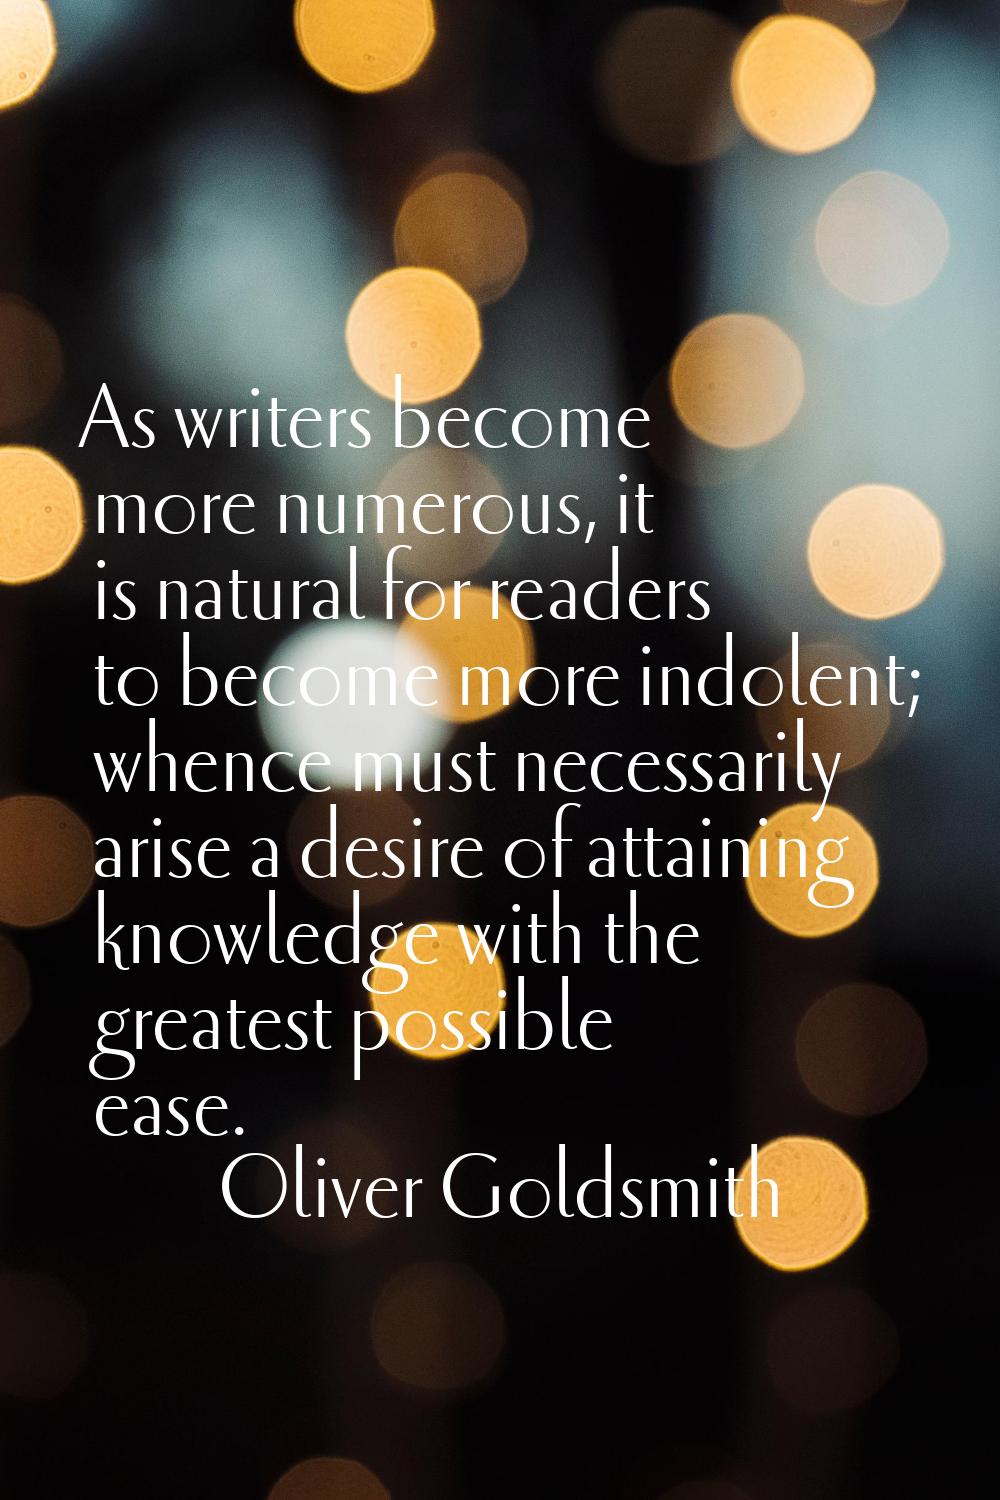 As writers become more numerous, it is natural for readers to become more indolent; whence must nec